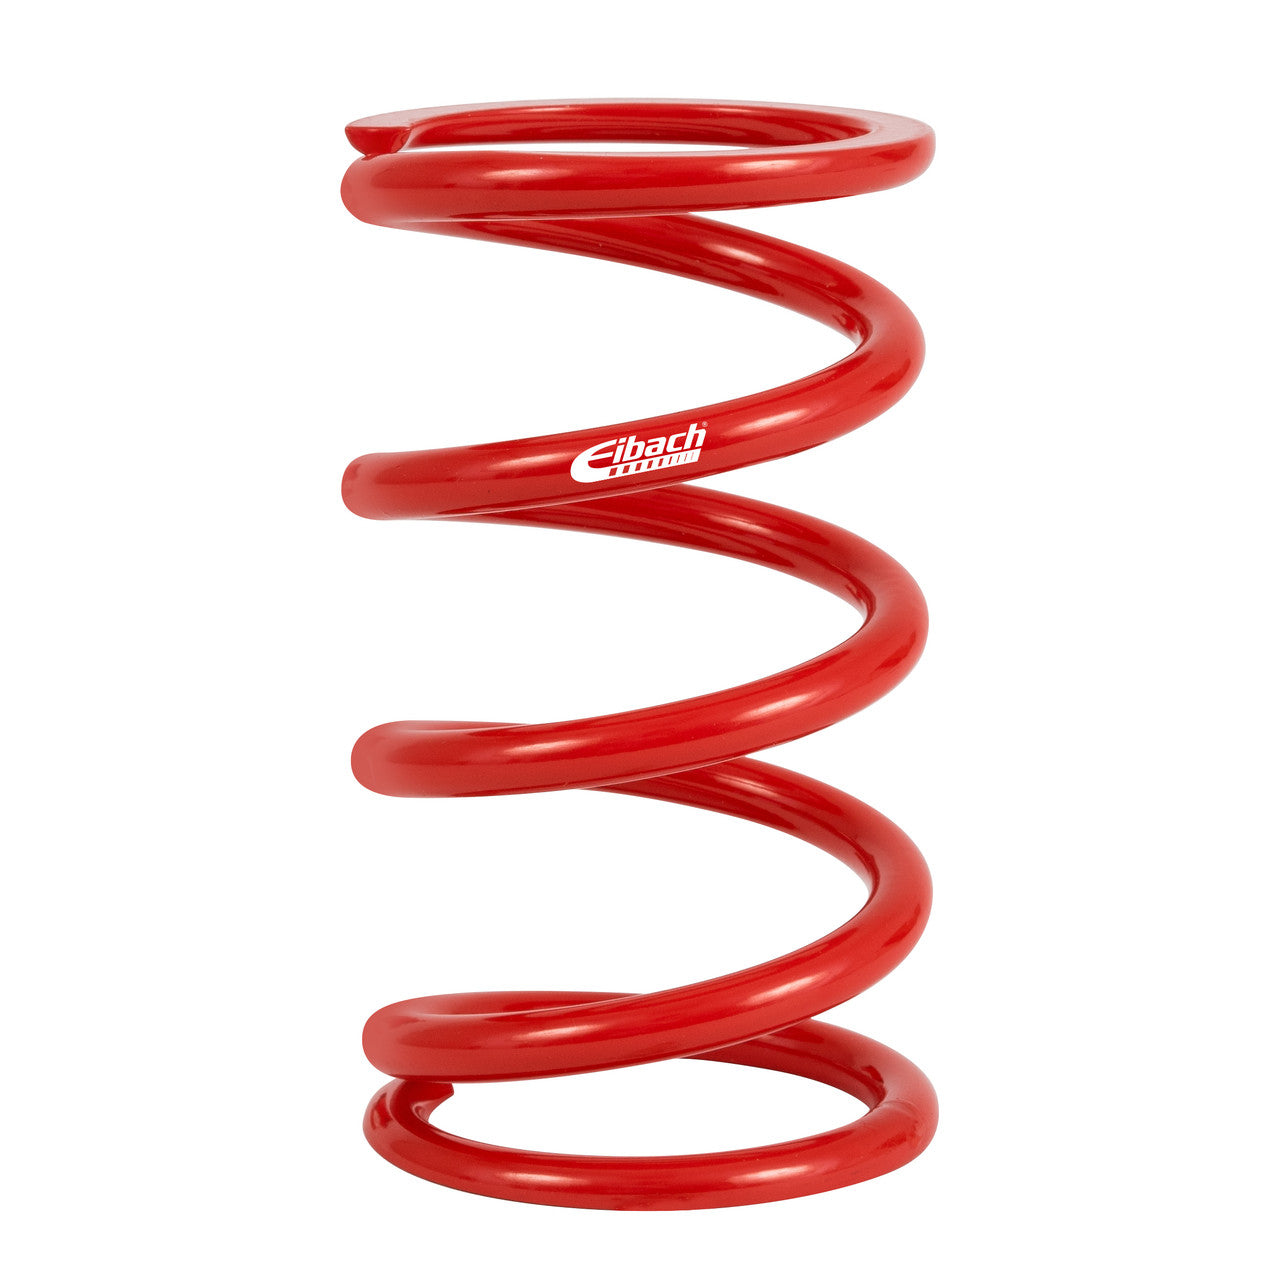 Eibach Metric Coilover Spring - 60MM I.D. 170-60-0160